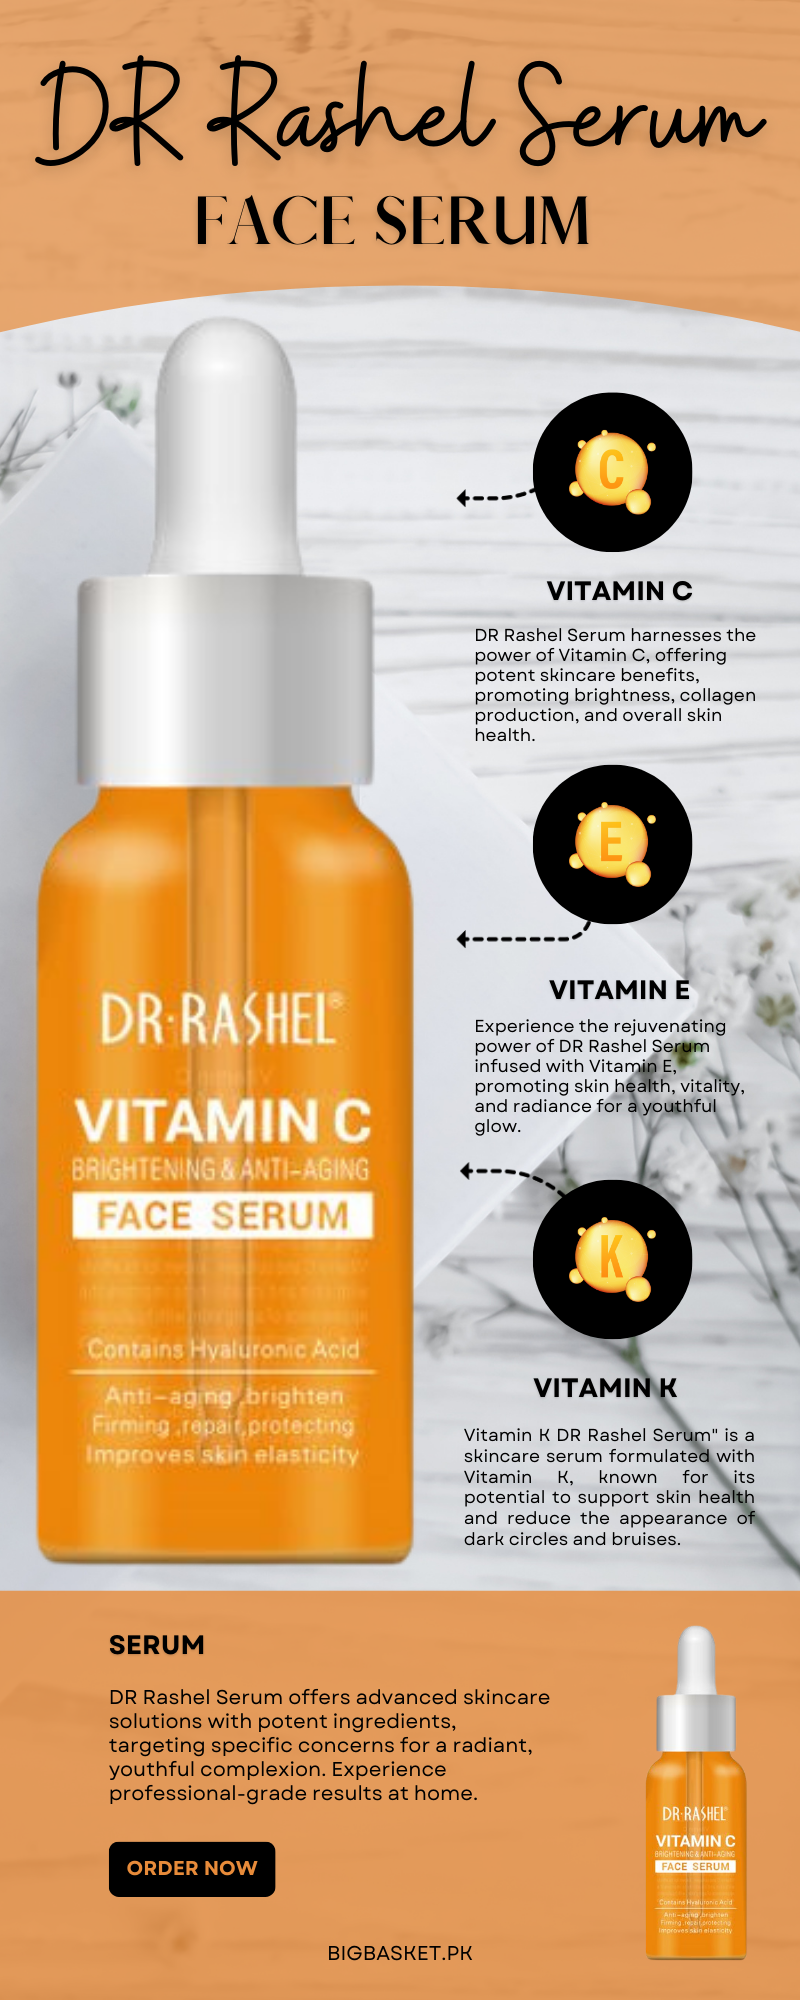 Combining DR Rashel Serum with other skincare products 